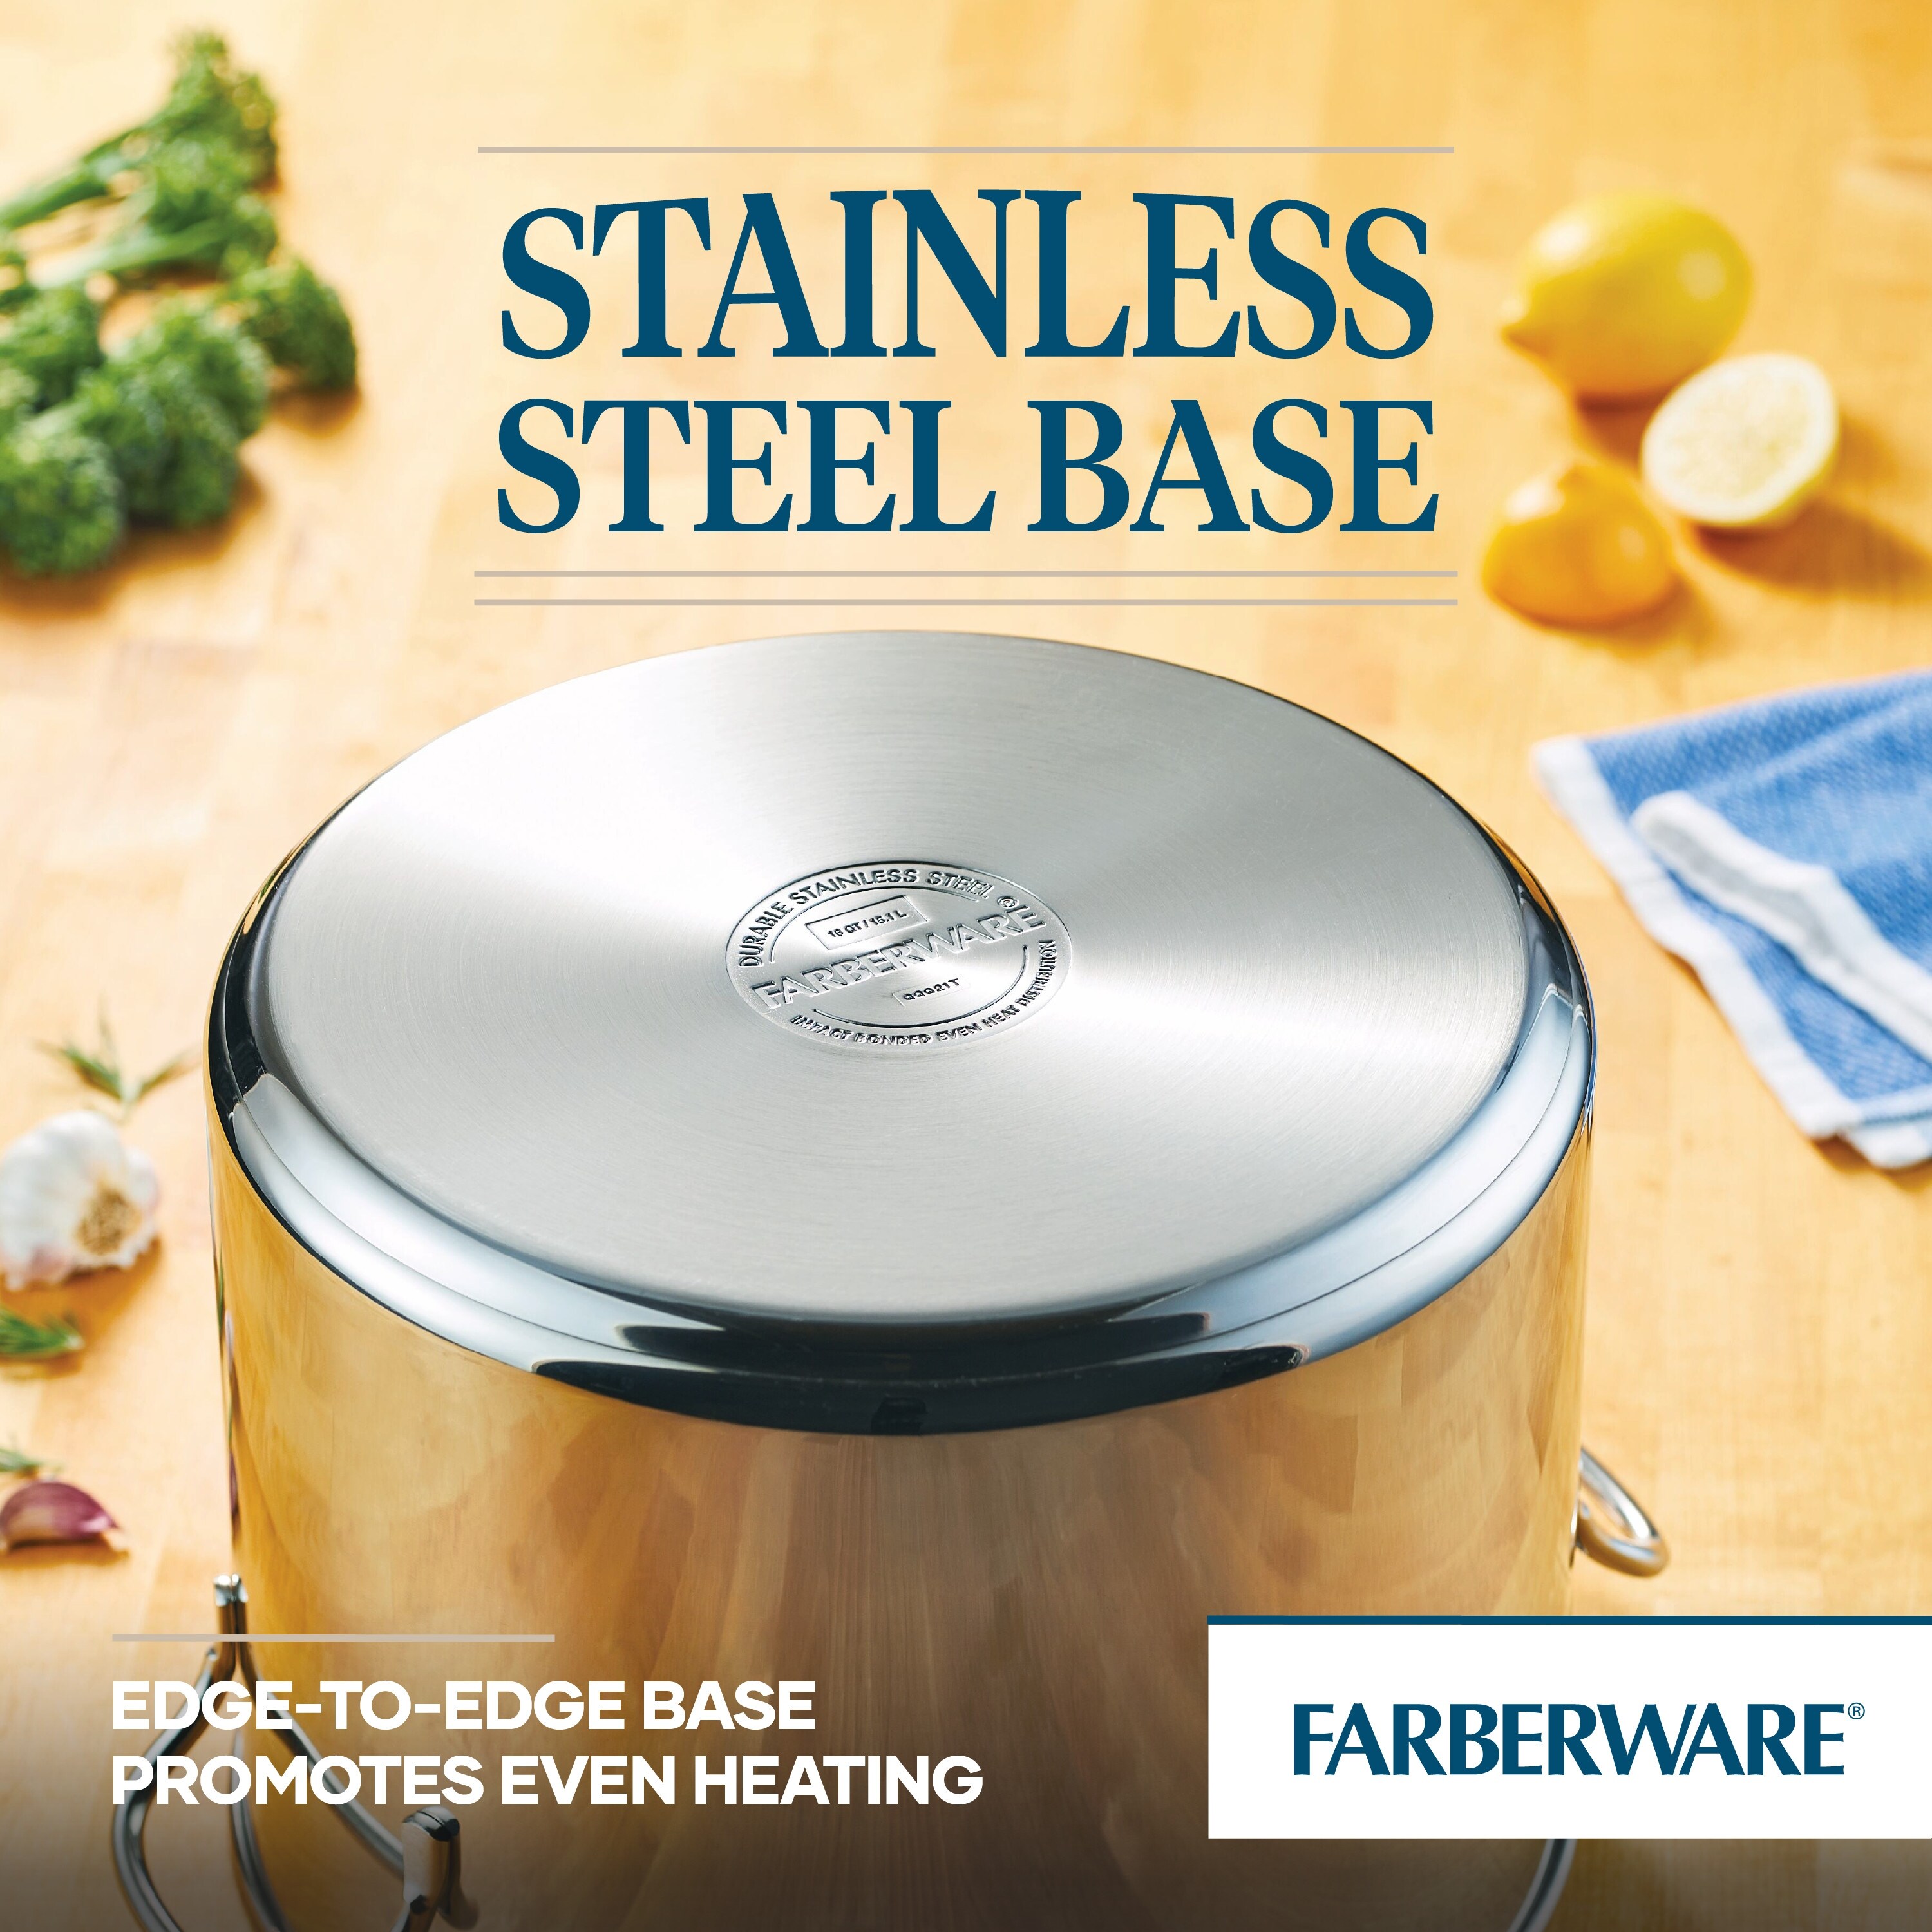 https://ak1.ostkcdn.com/images/products/is/images/direct/de315c68477d12e14cee037090749ed4c233dbfe/Farberware-Classic-Stainless-Steel-16-quart-Covered-Stockpot.jpg